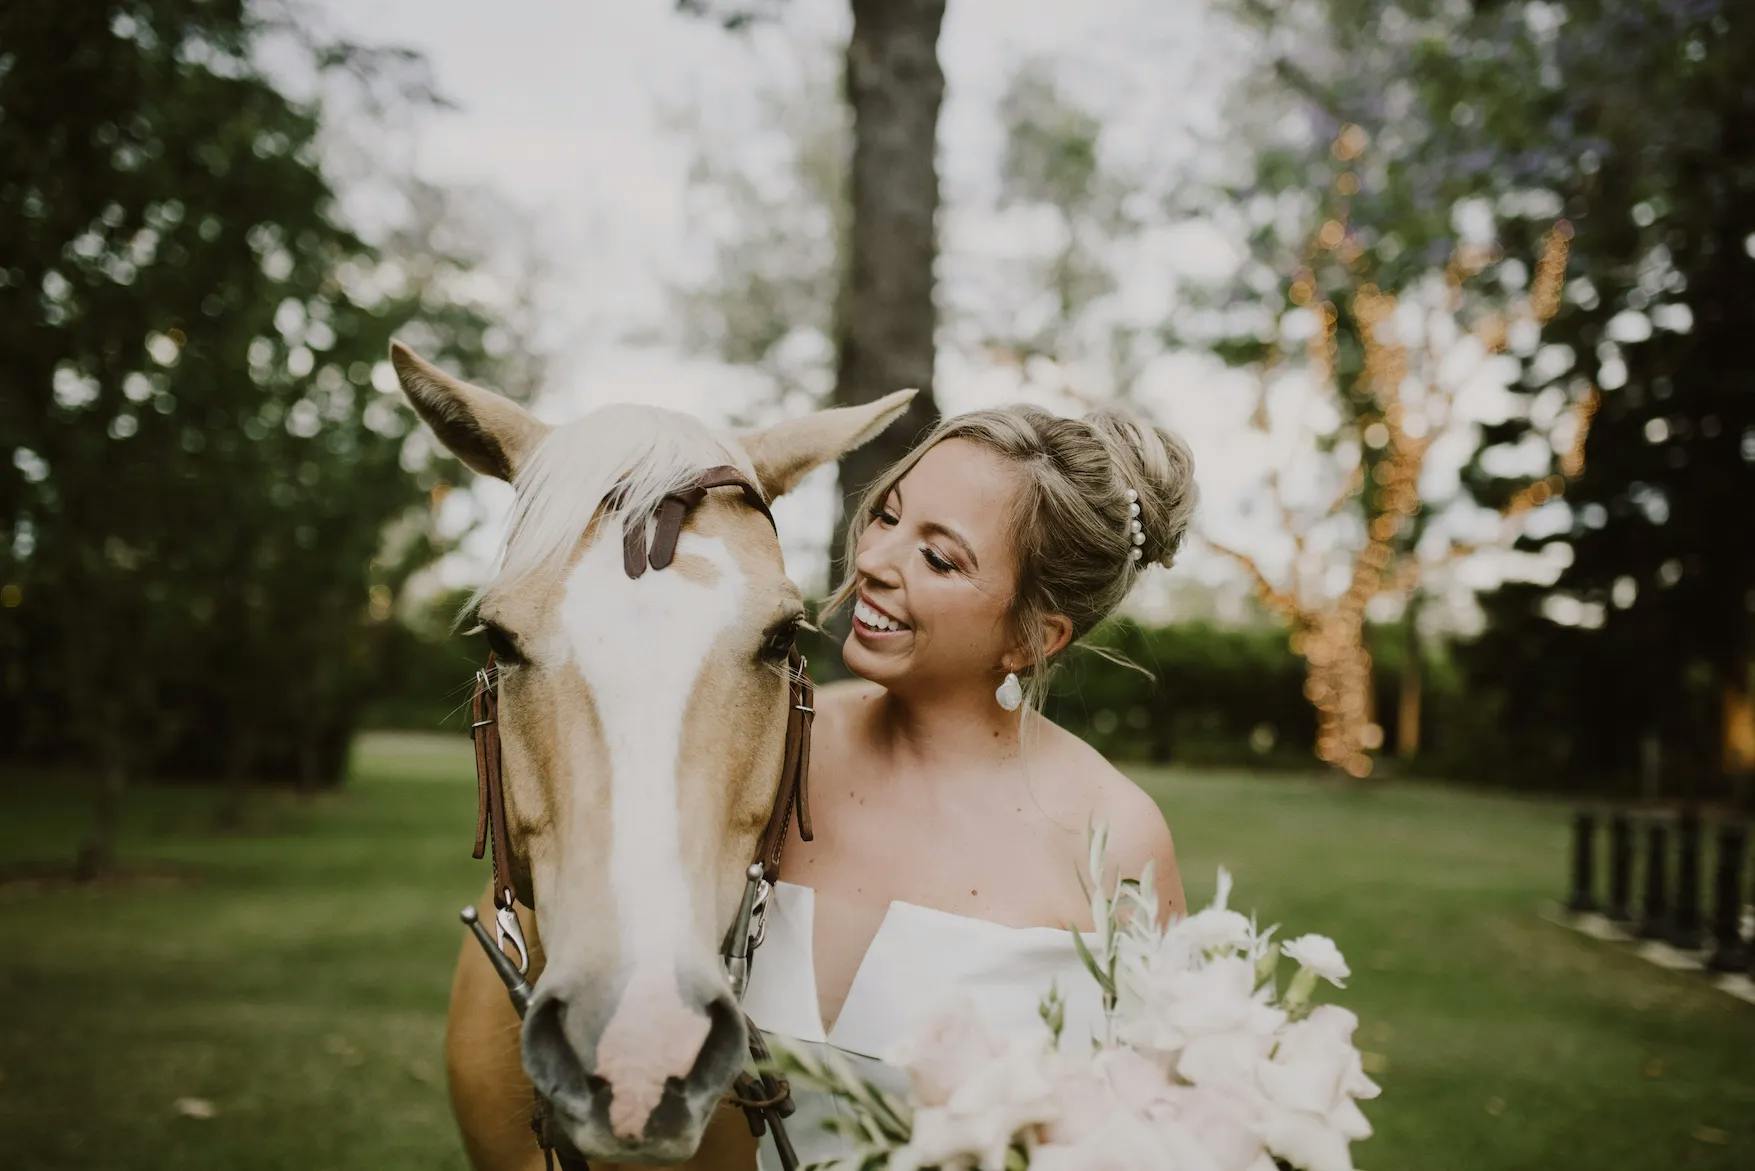 A bride in a white dress is standing outdoors, smiling and holding a bouquet of flowers while affectionately leaning close to a light brown horse. The background features greenery and trees with twinkling lights.